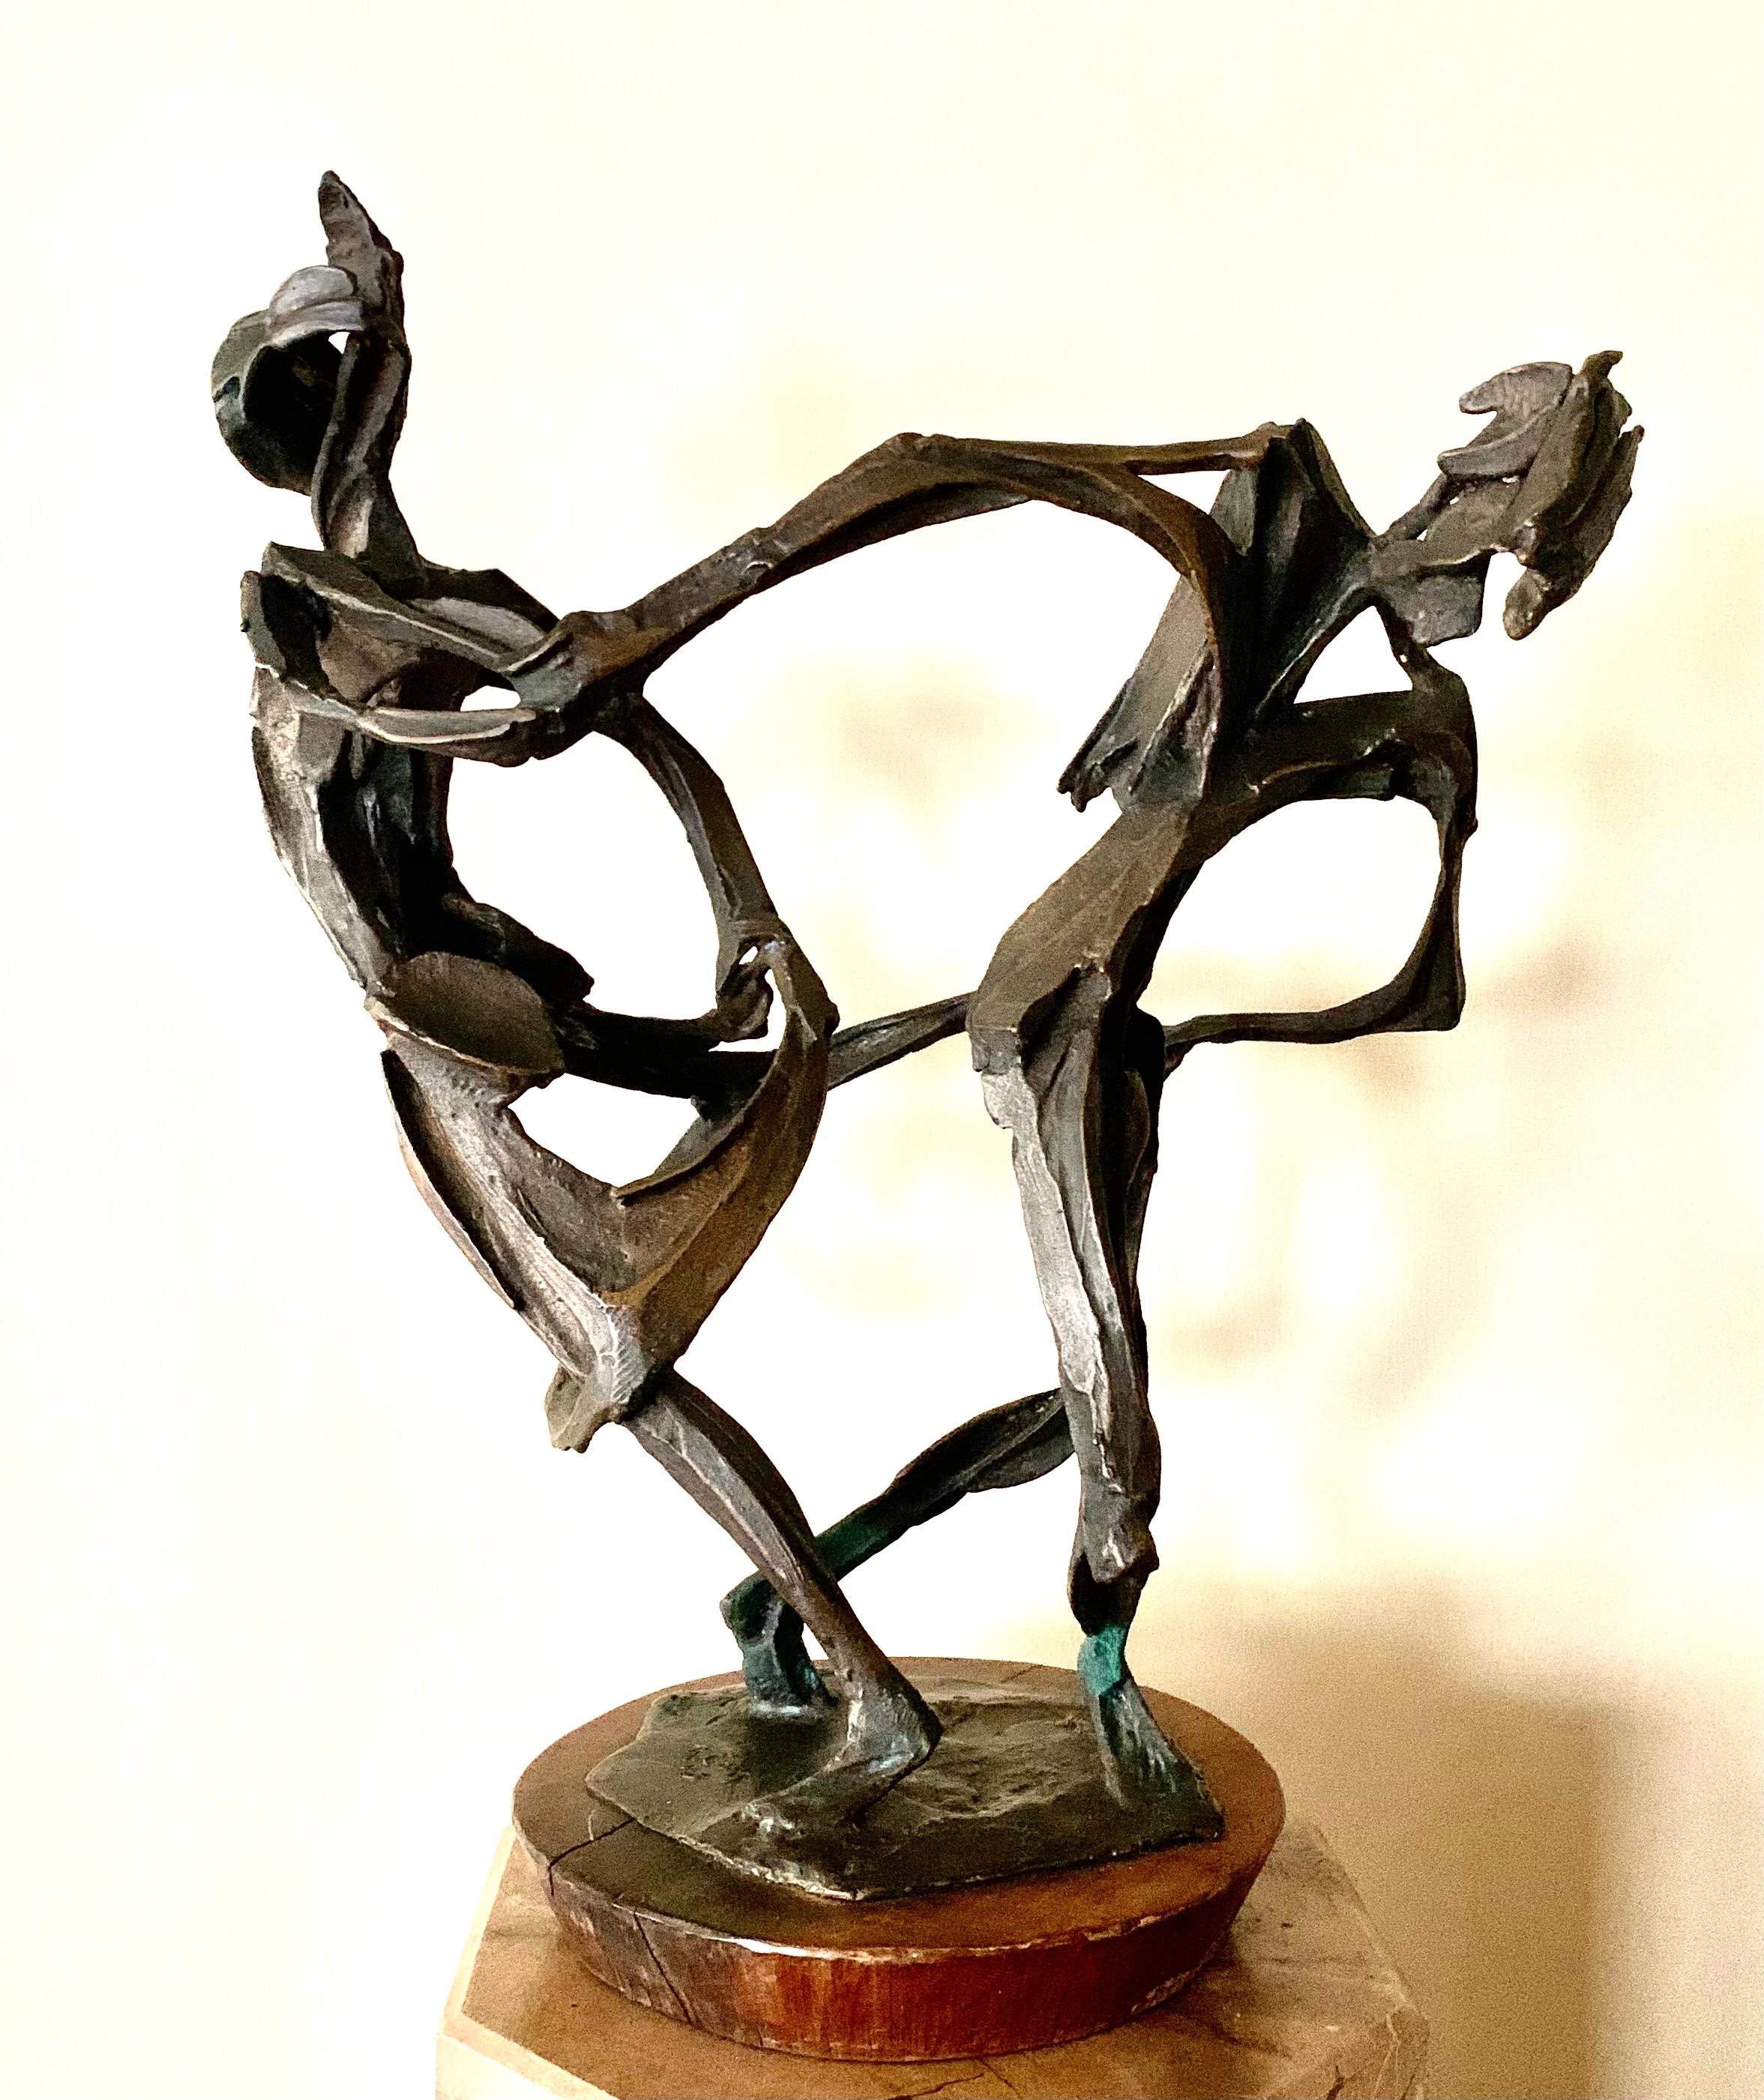 Entitled “Whirl”, a large bronze sculpture by Robert Cook, American (1921-2017) depicting a dancing couple captured in the moment of a whirl. Wonderful early work by the artist, dated 1963 with exhibition labels on the underside of the original hand